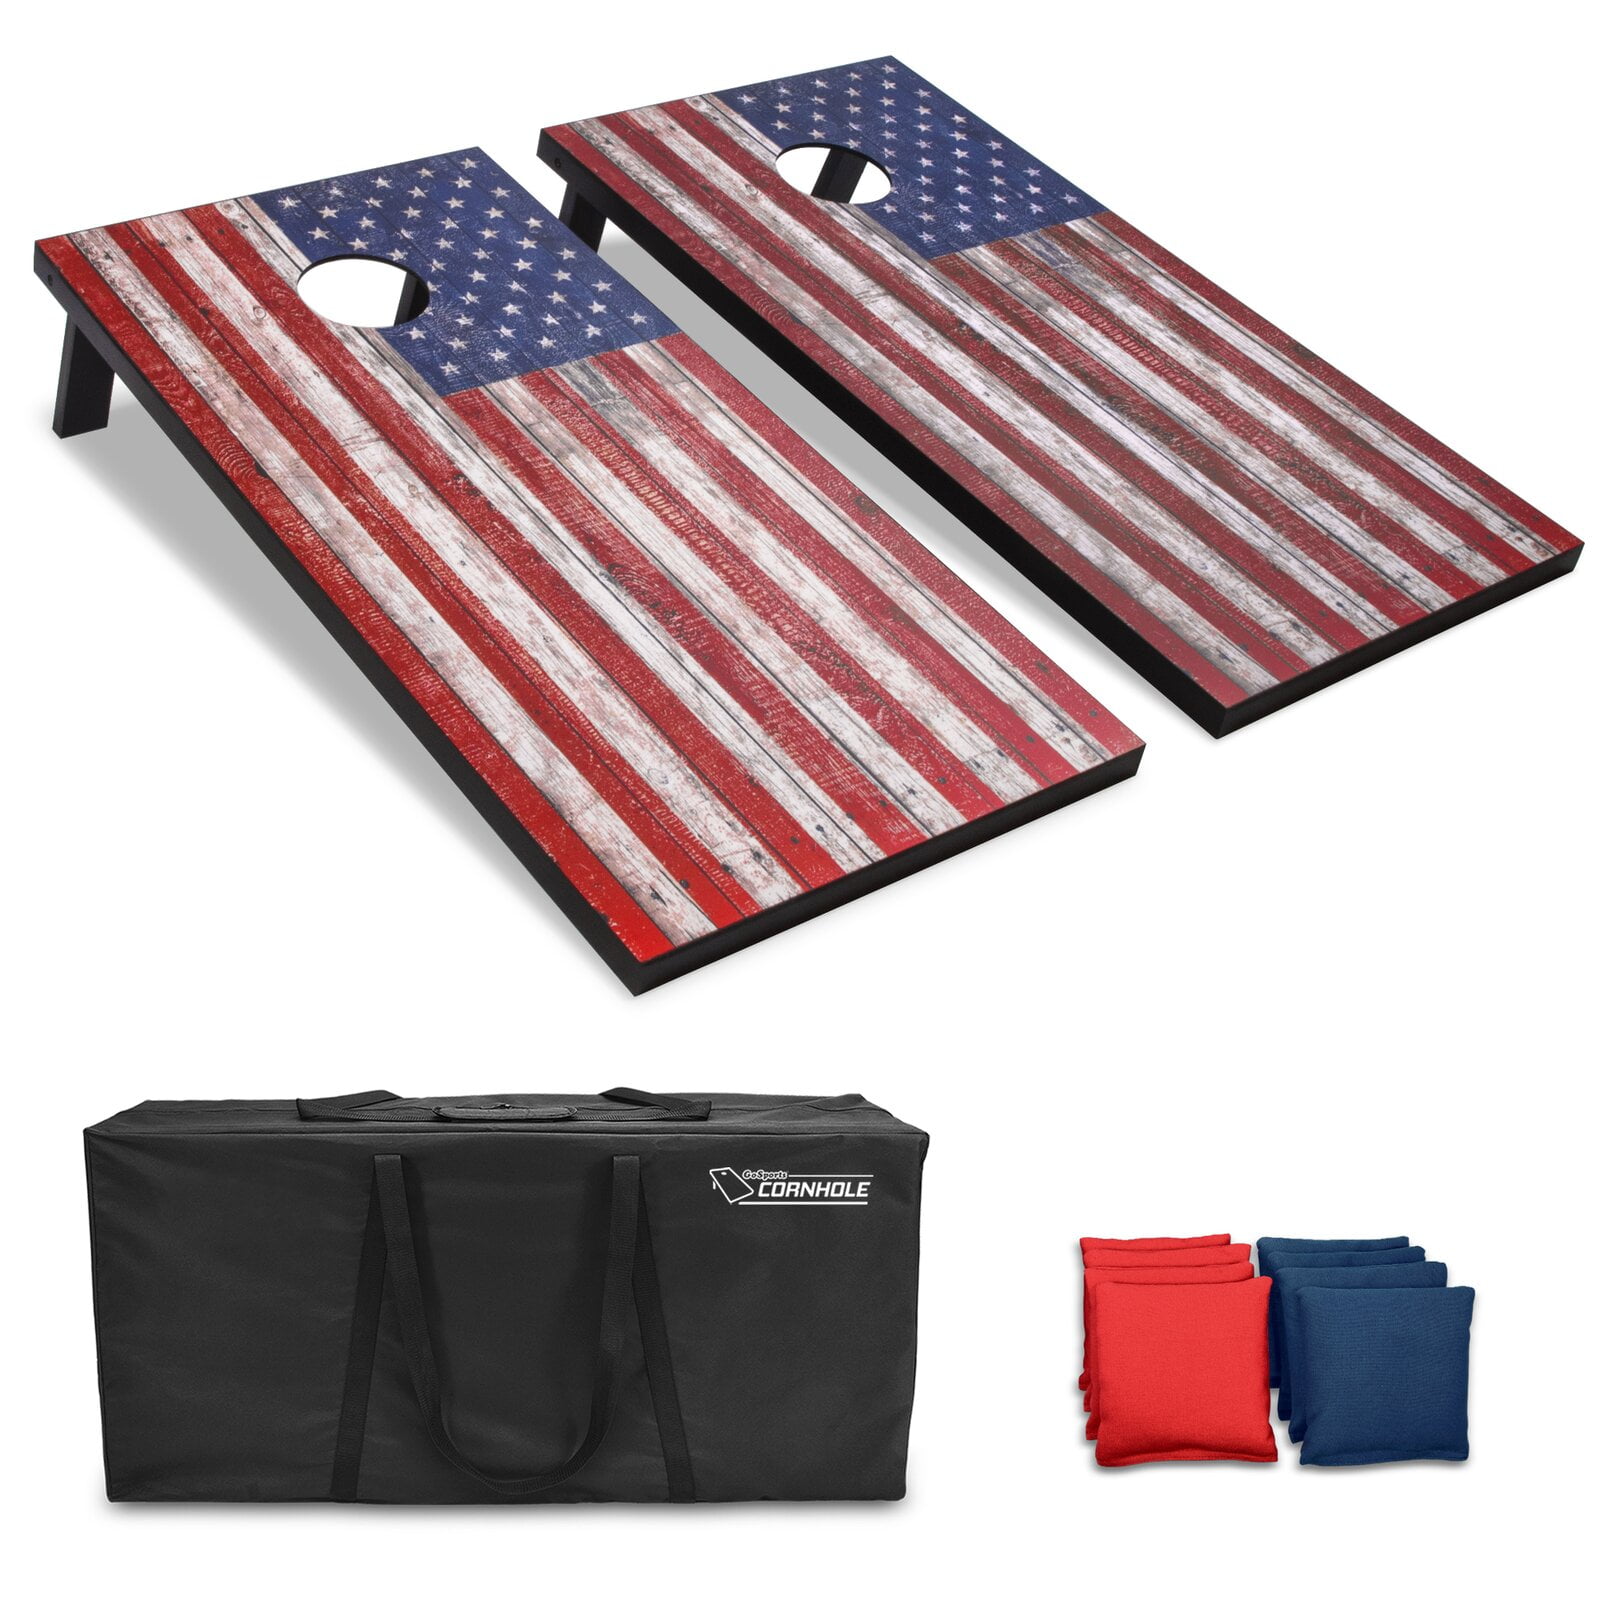 Corn Filled Red and Grey Set of 8 Cornhole Bags Regulation Size 